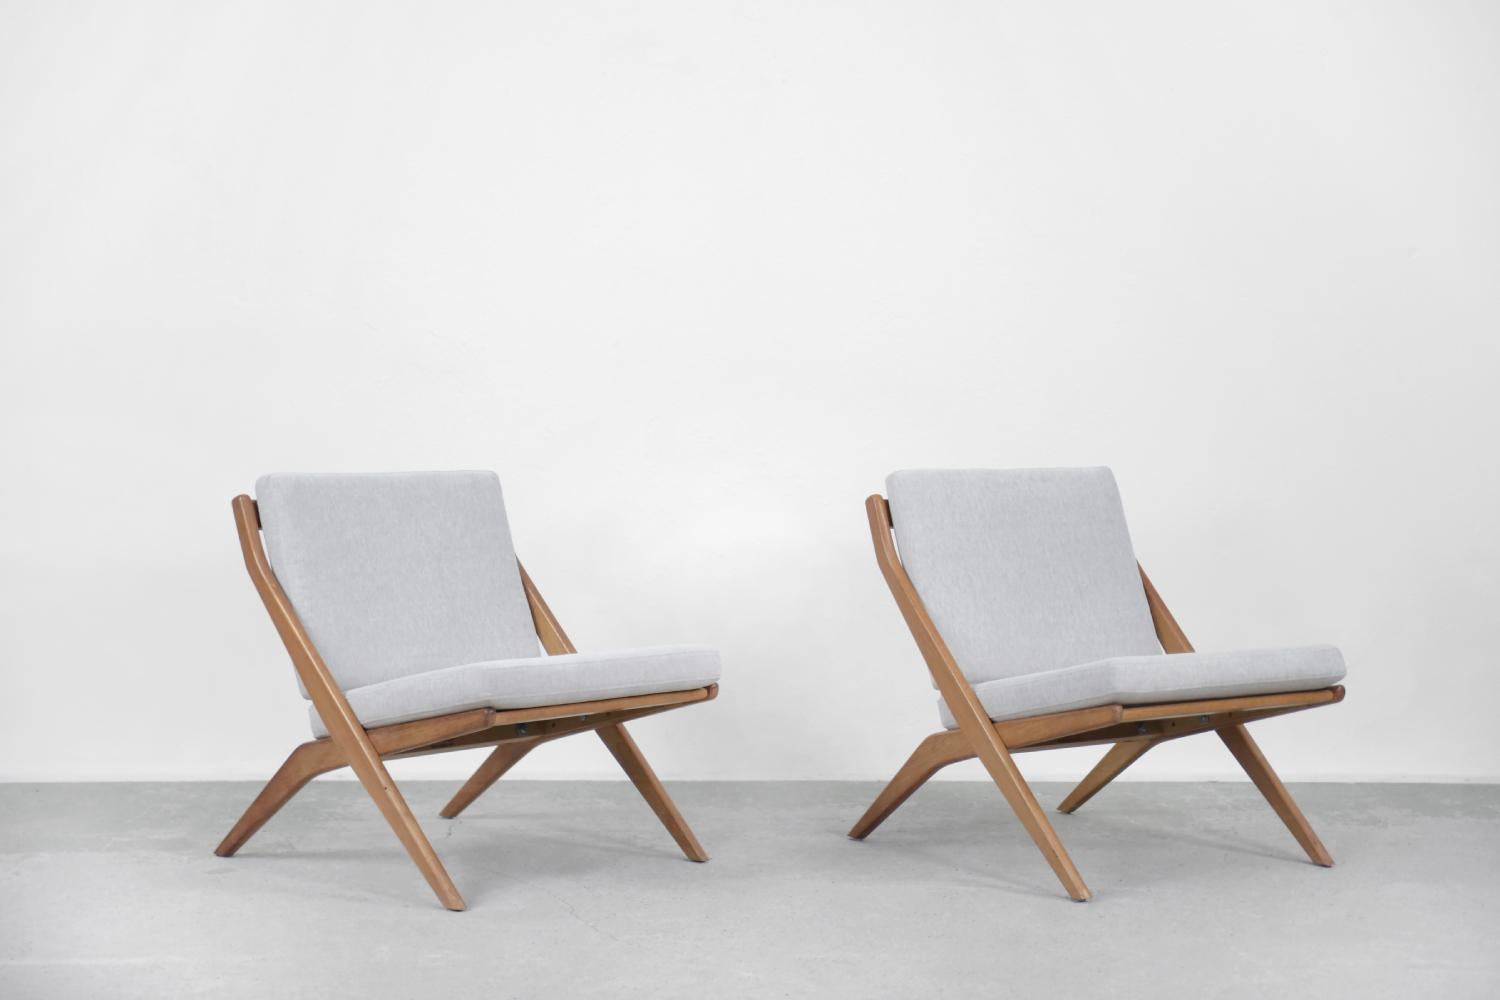 Pair of Mid-Century Modern Swedish Scissor Chairs by Folke Ohlsson for Bodafors In Good Condition For Sale In Warszawa, Mazowieckie